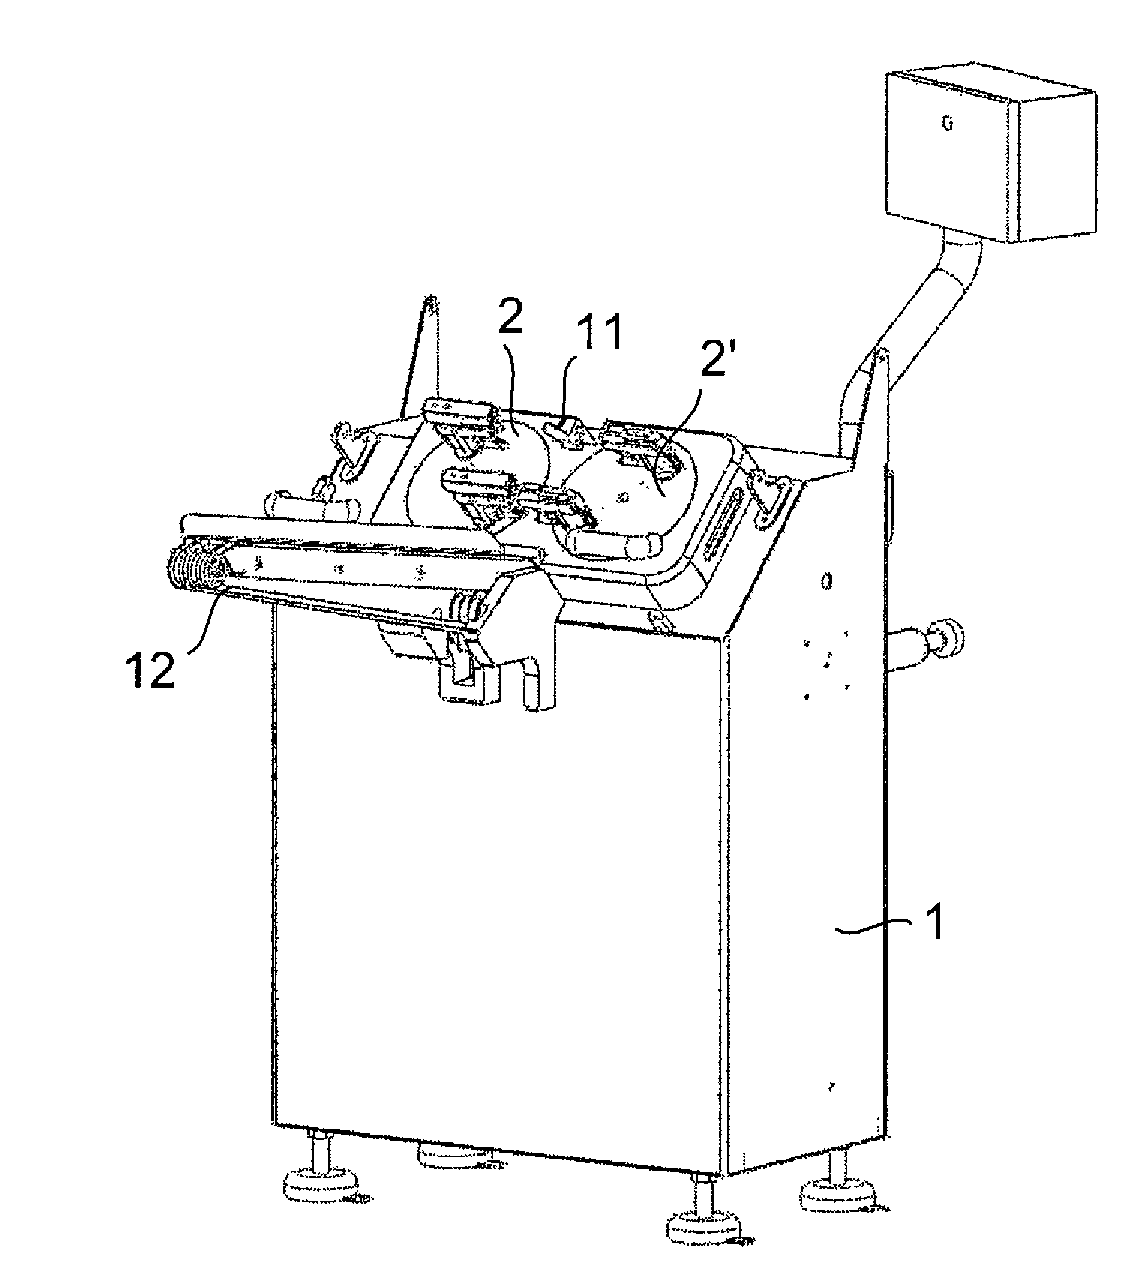 Portioning device including clamps and a cutting blade